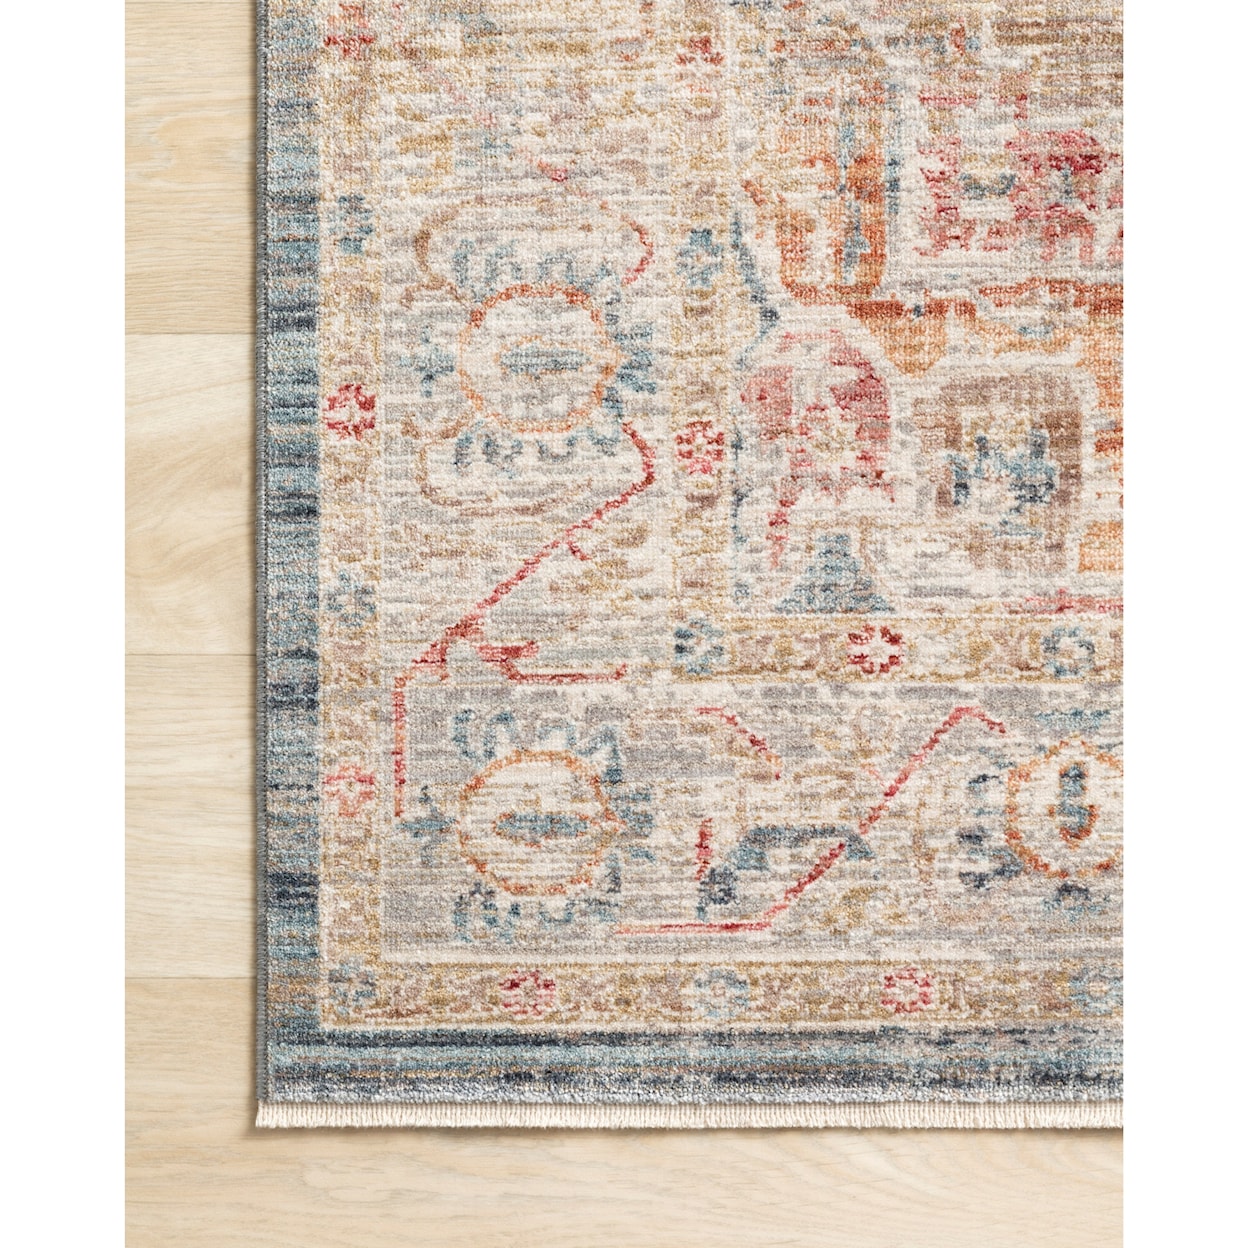 Reeds Rugs Claire 9'6" x 13' Blue / Multi Rug